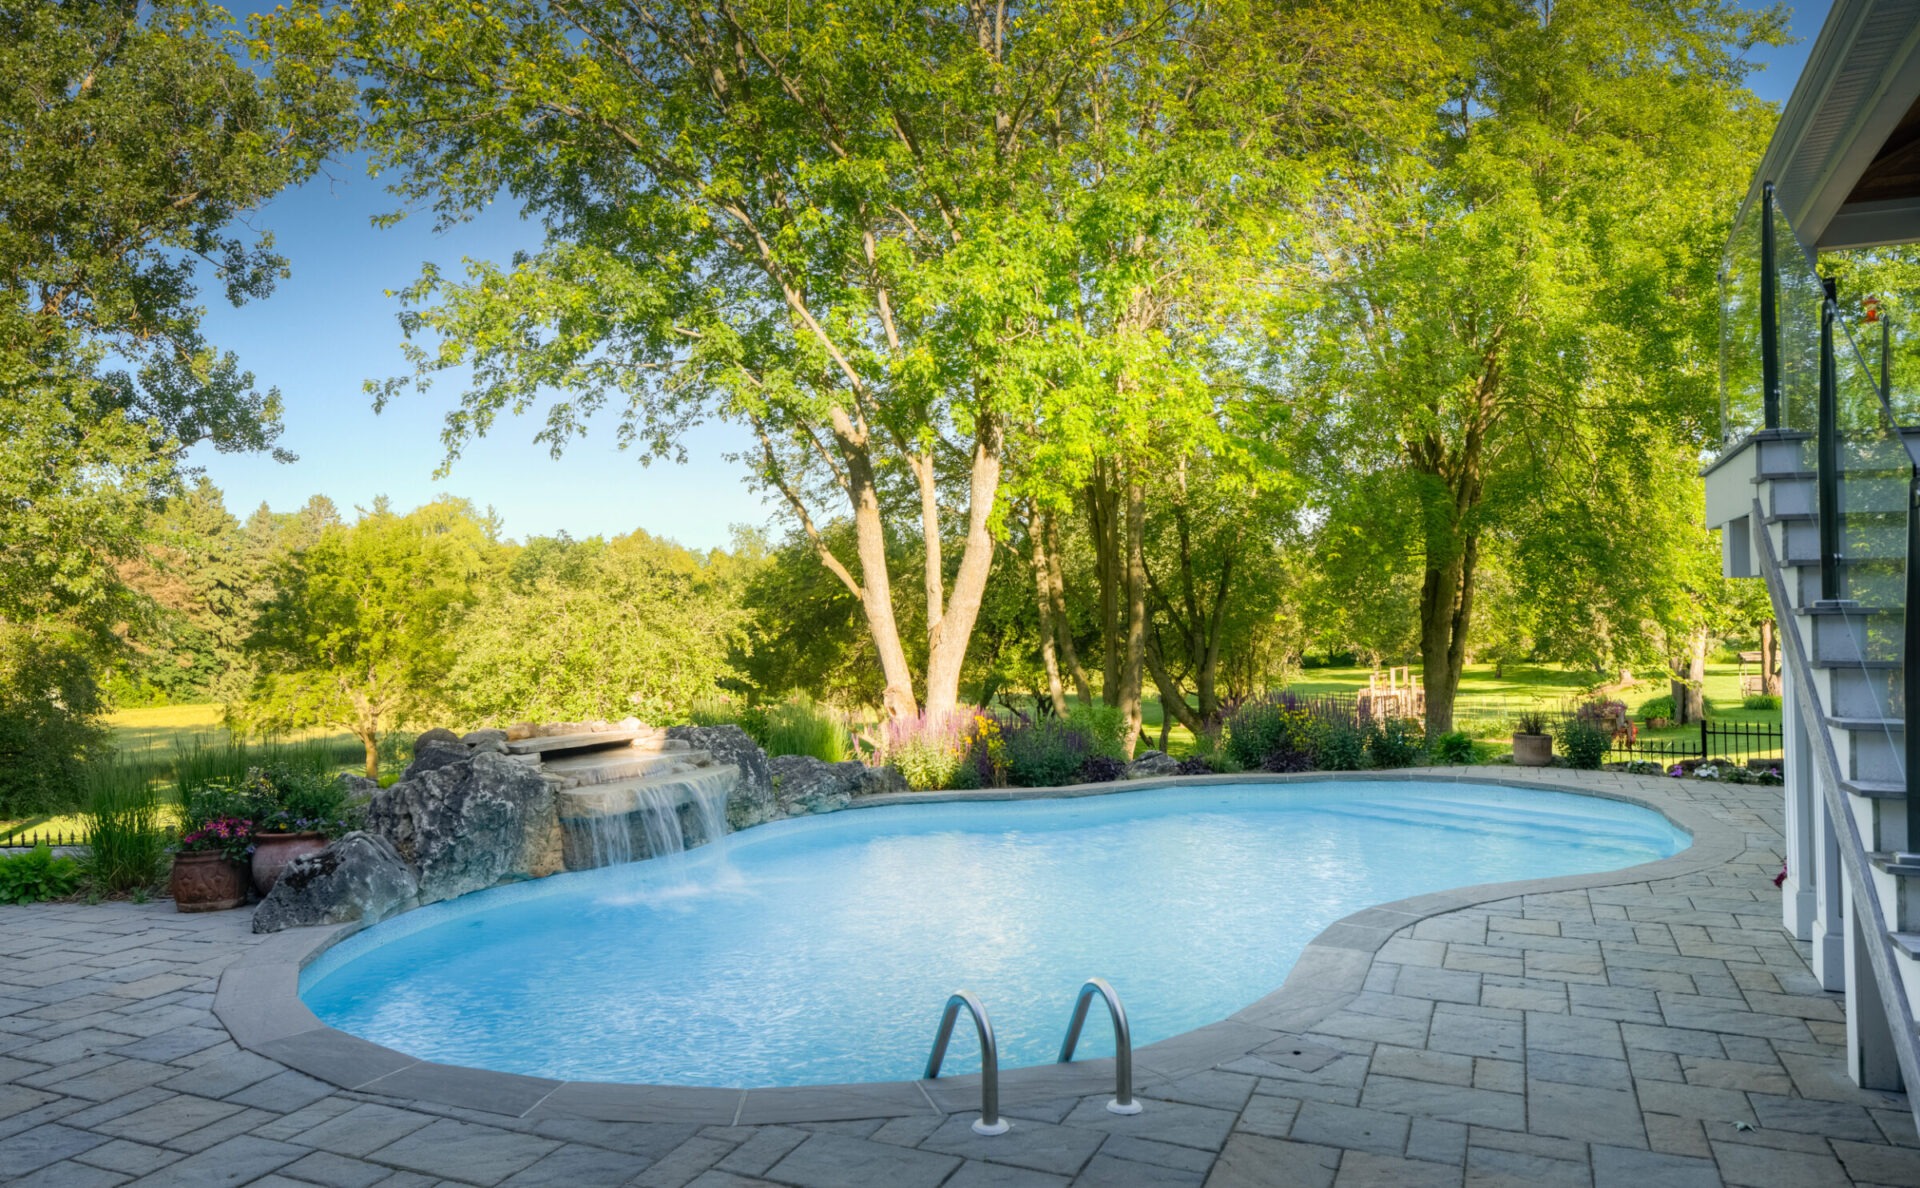 This image shows a tranquil backyard with a curvy swimming pool, stone waterfall feature, paved patio, lush greenery, and clear blue skies.